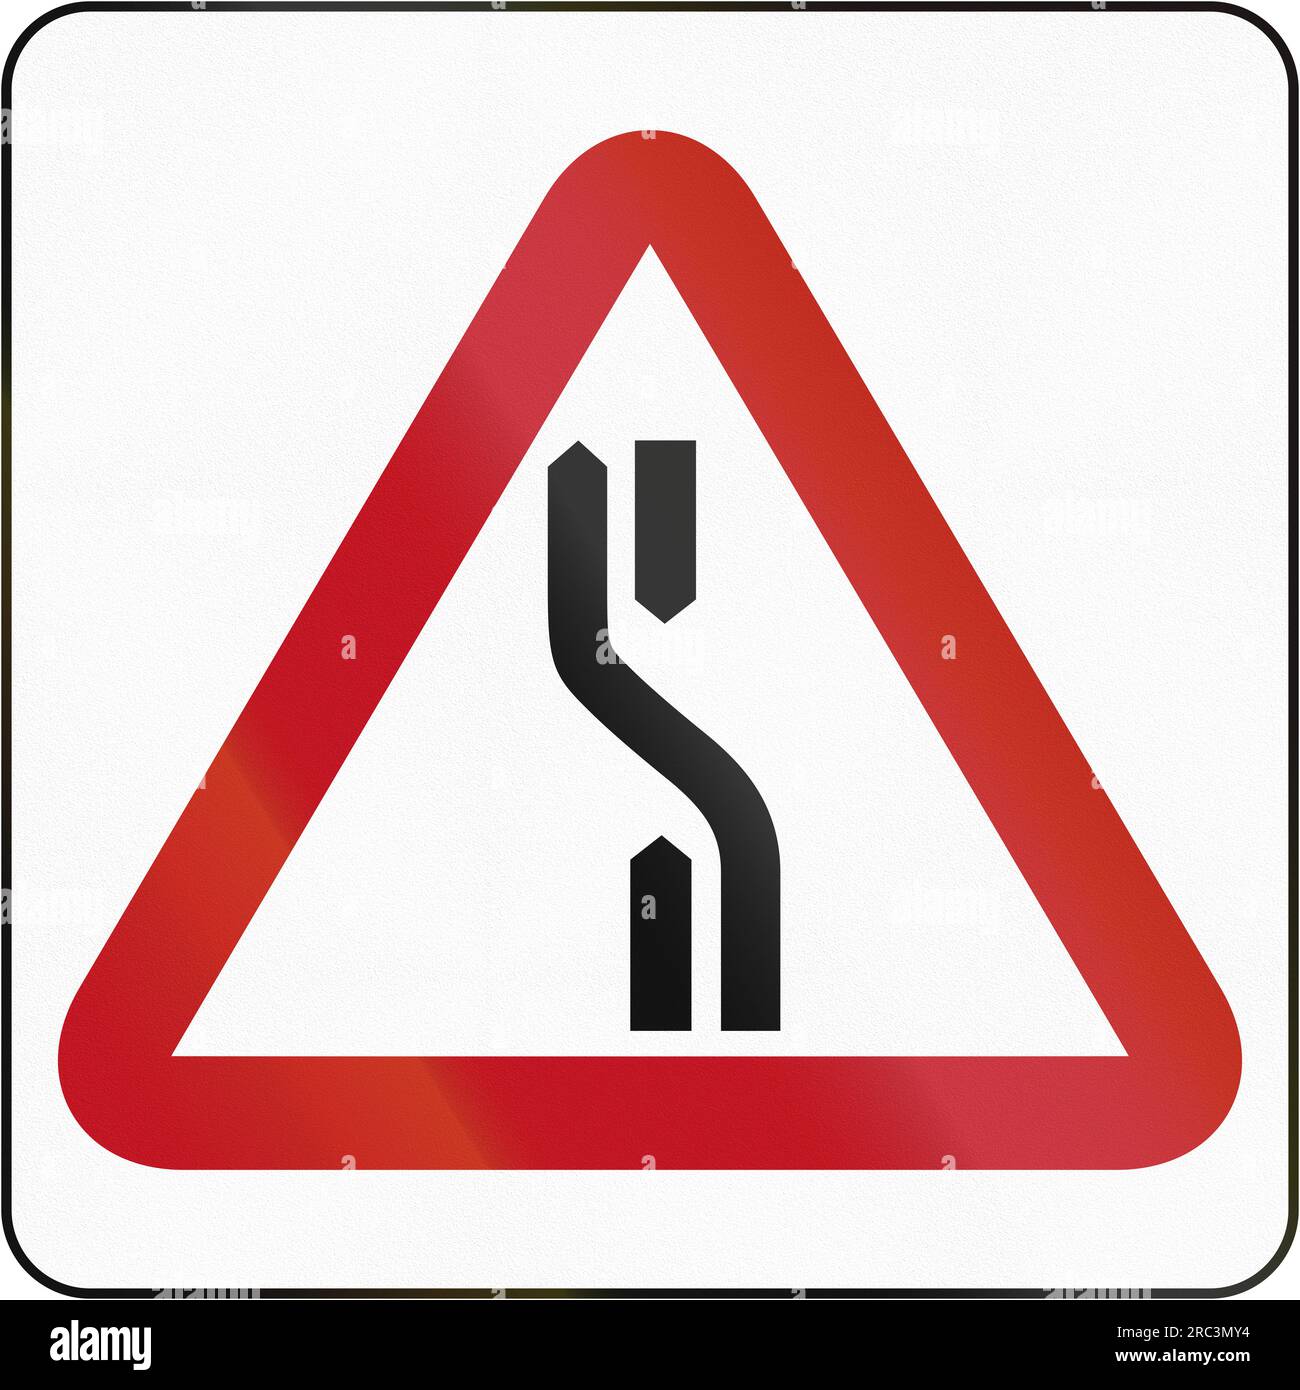 Road sign in Brunei: Carriageway Diverts To Left Stock Photo